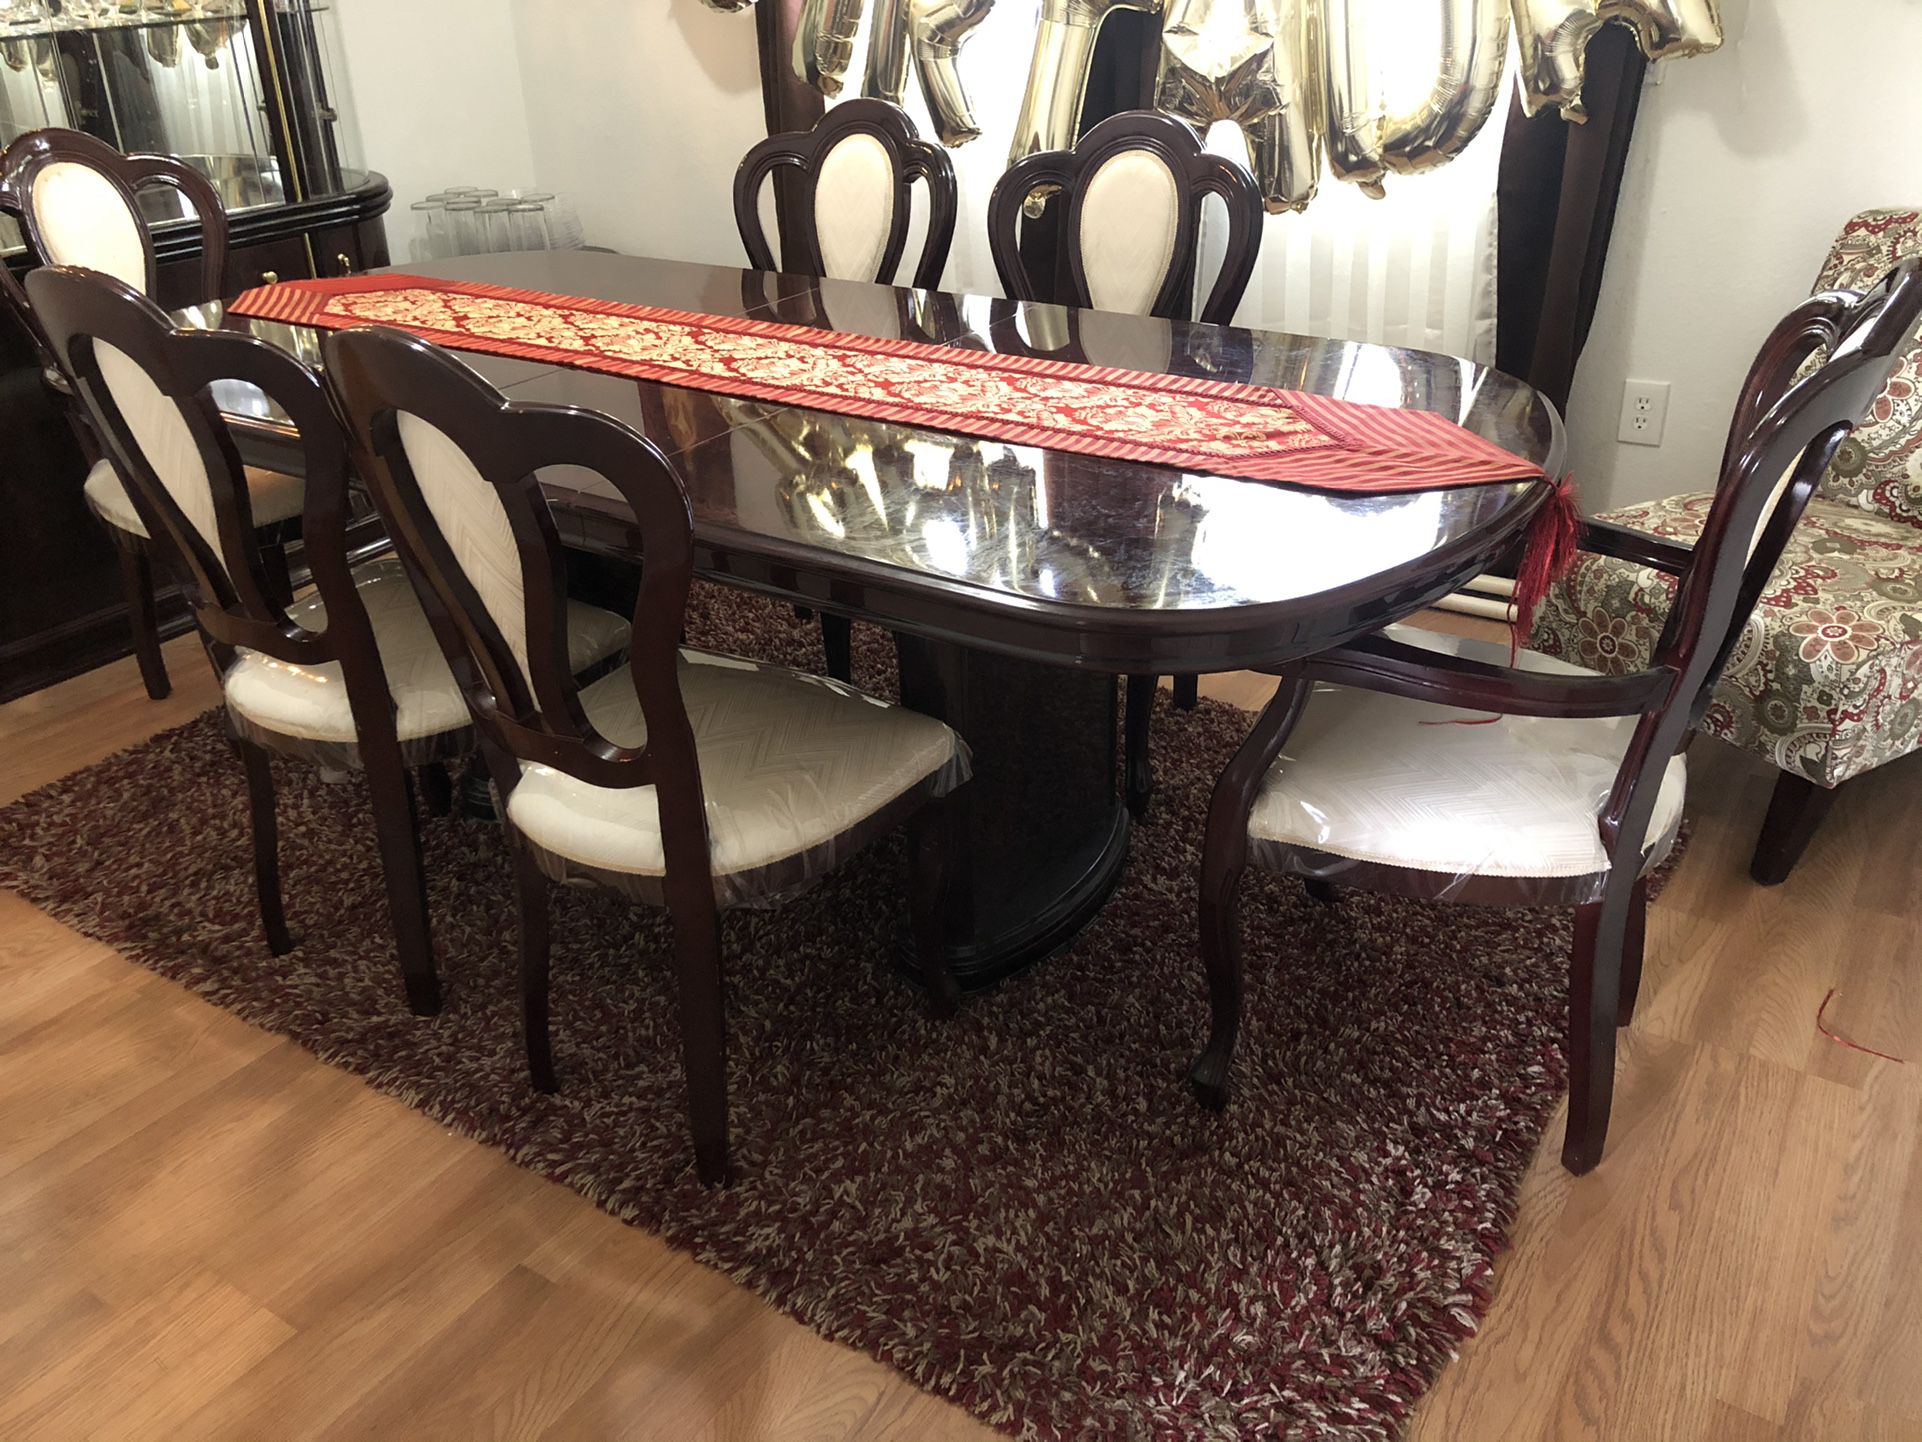 Used Dining Room Chairs Near Me - Used Dining Table 3 Chairs Bengaluru